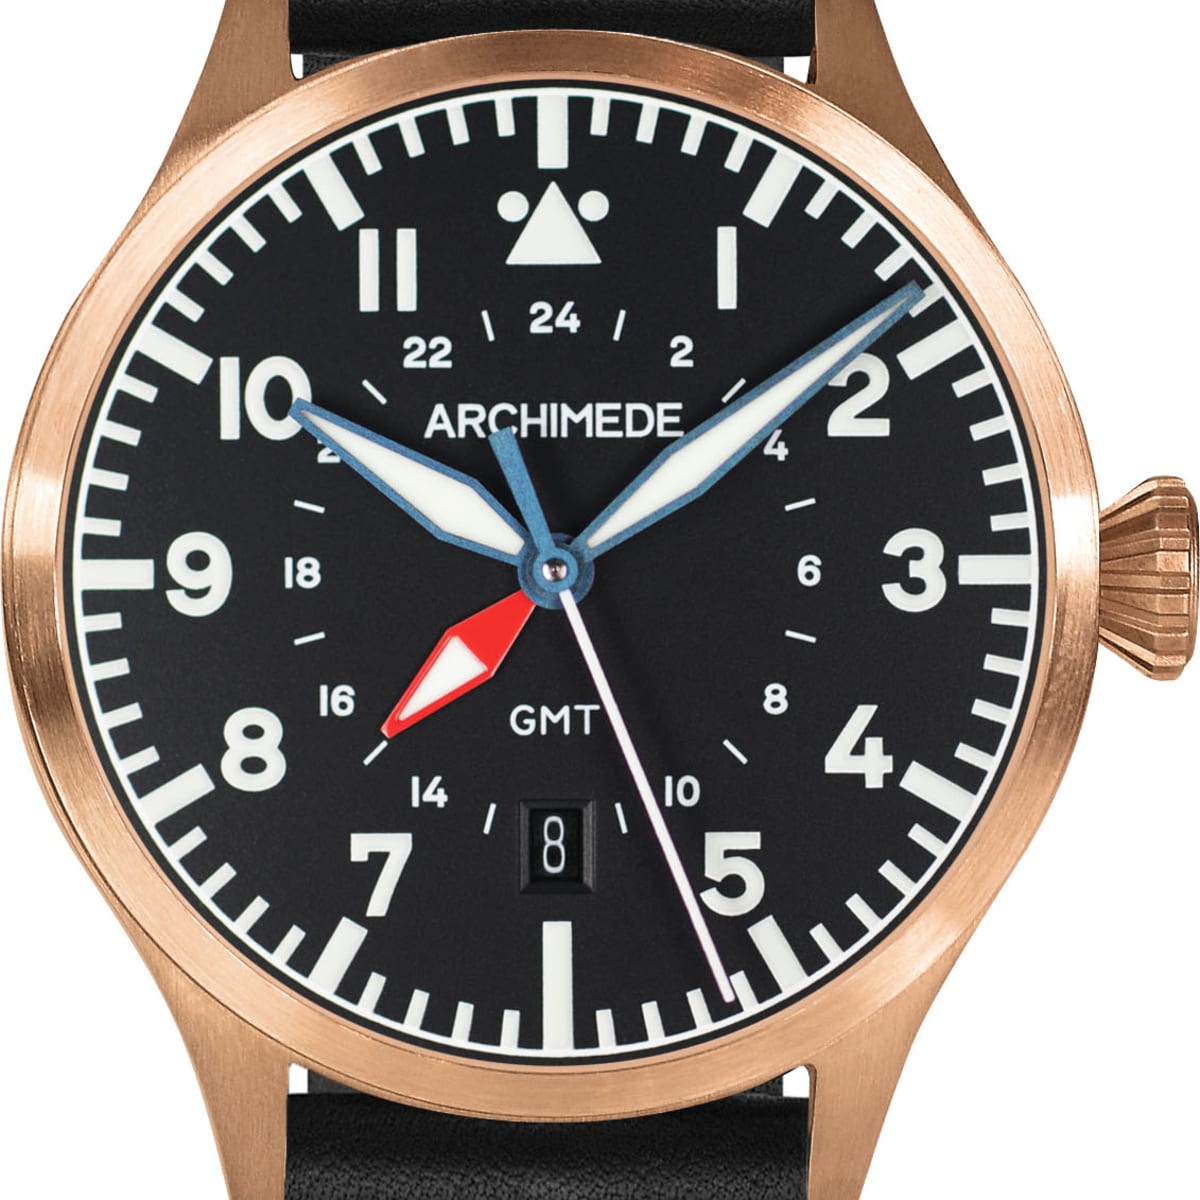 Archimede SportTaucher Review – How Do You Say 'Badass' in German?